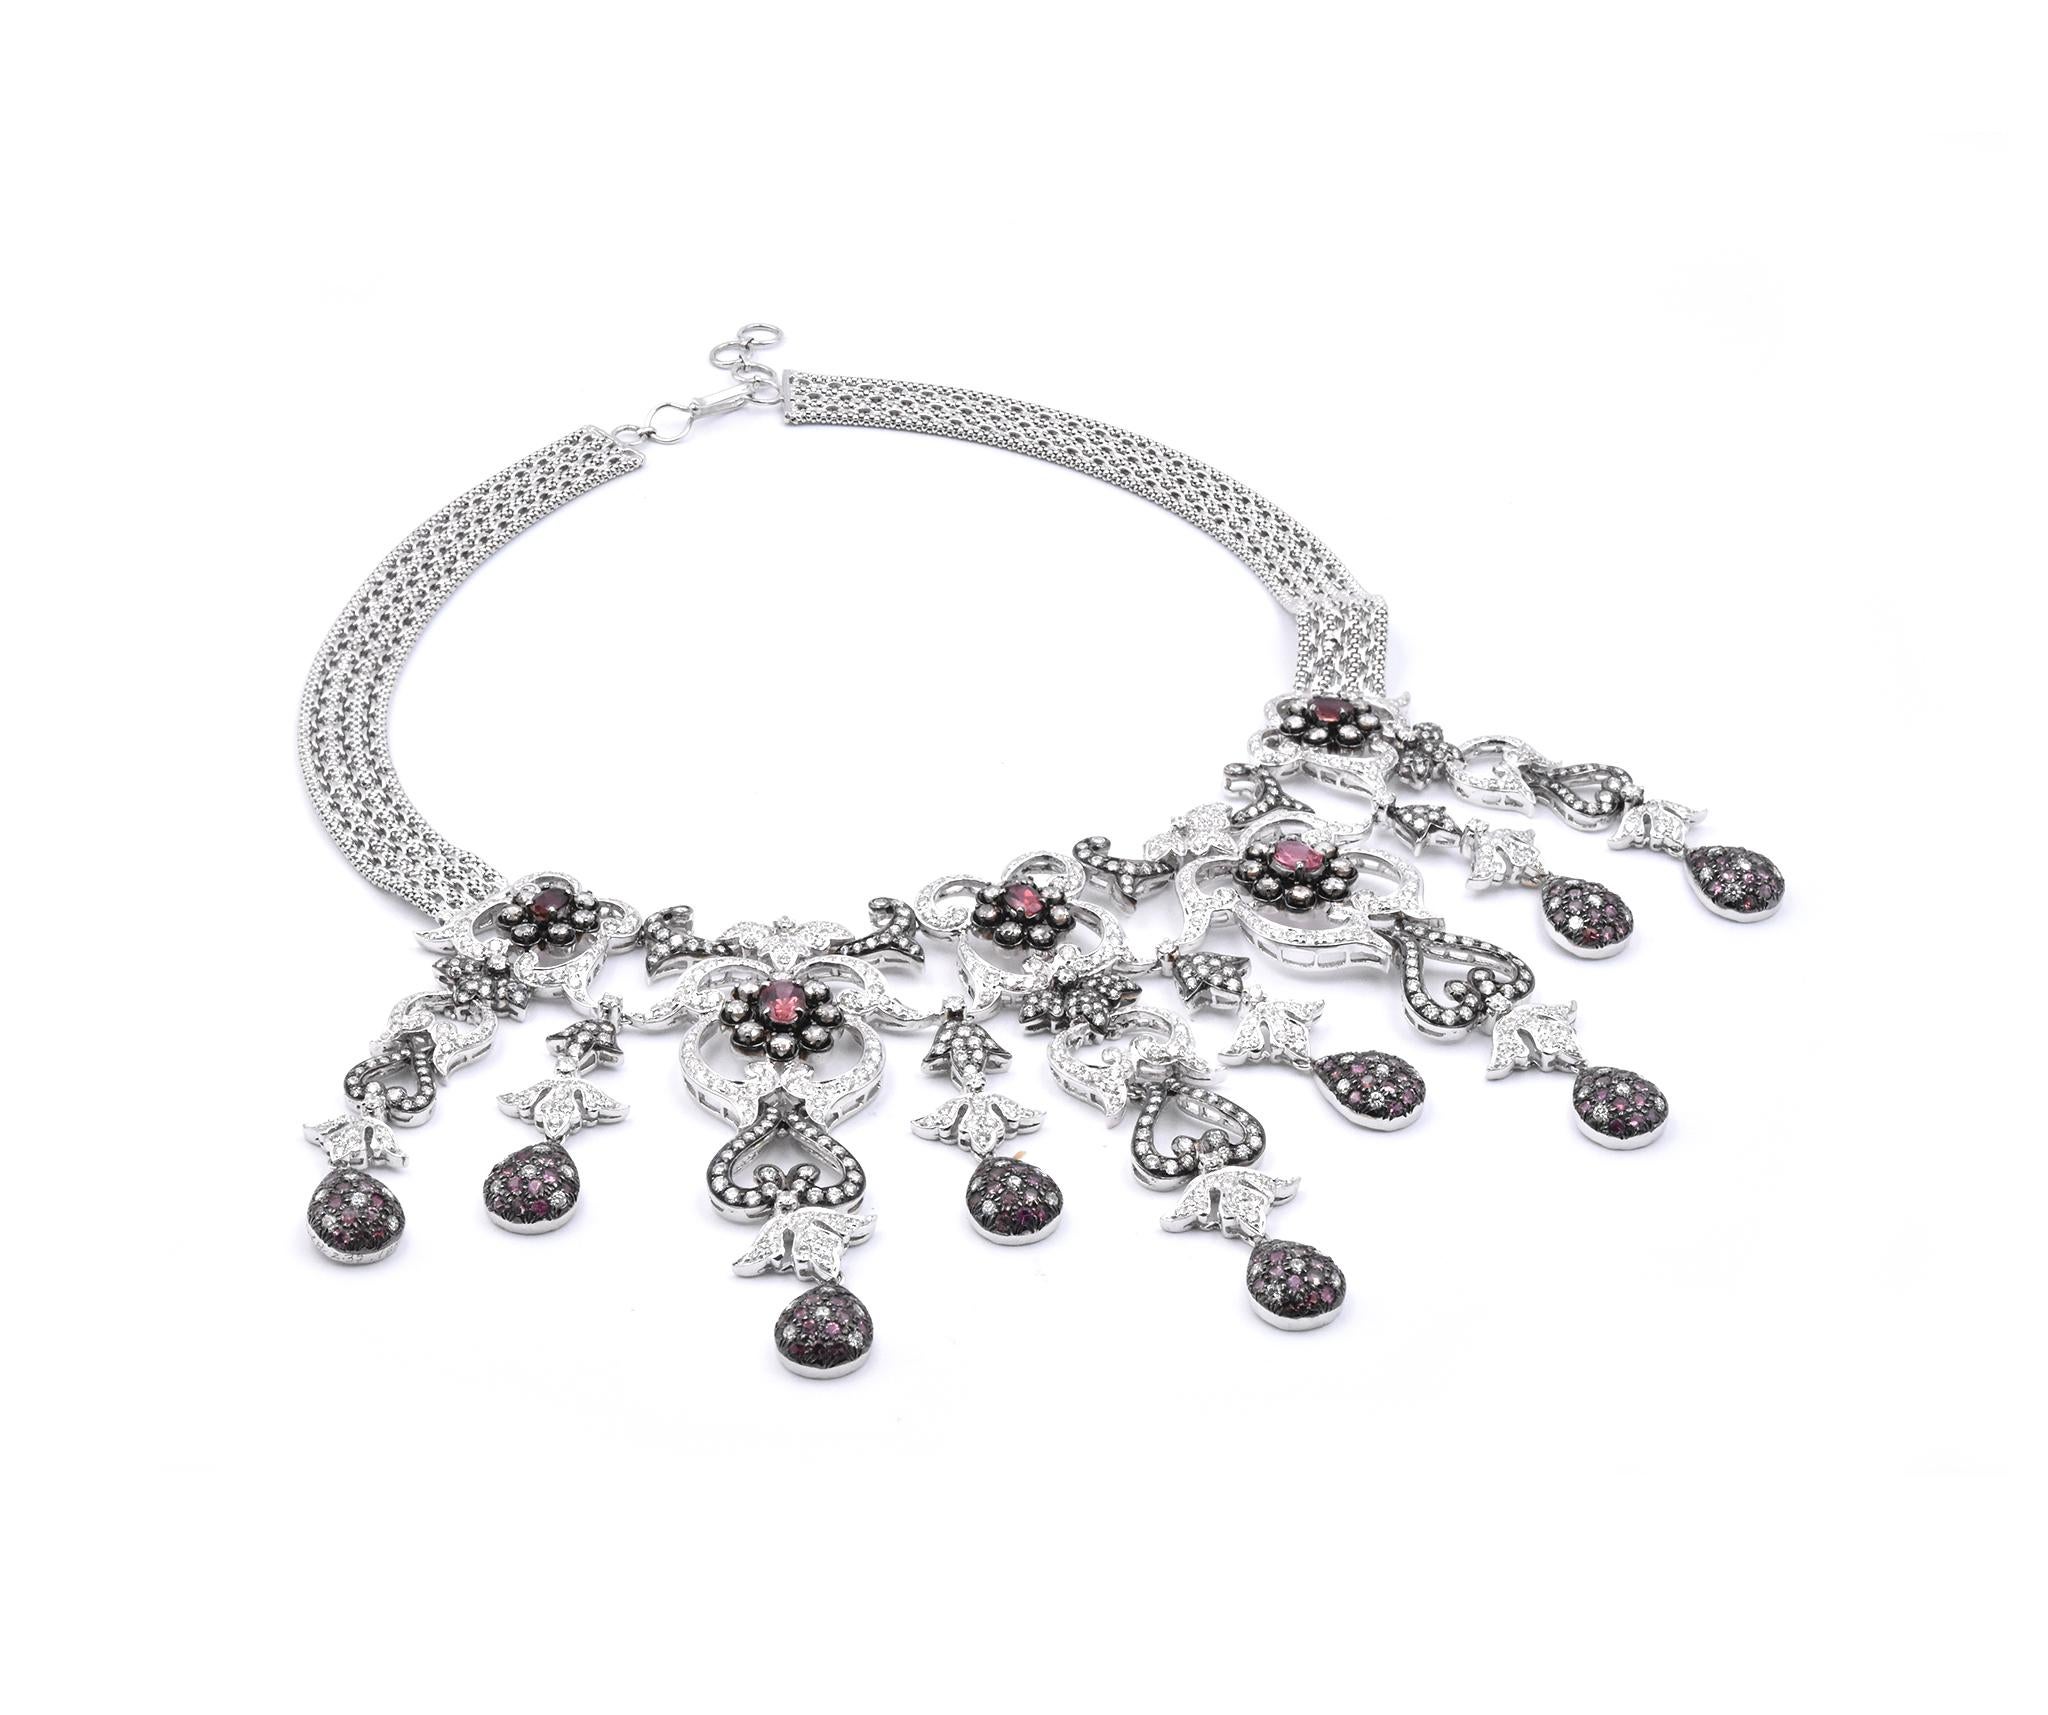 Material: 18k white gold
Gemstone: 125 Pink Sapphires oval and round brilliant cuts = 3.50cttw
Diamonds: 781 round brilliant cuts = 16.48cttw
Color: G
Clarity: VS
Cognac Diamonds: 35 round brilliant cuts= 1.90cttw
Dimensions: necklace is 16-inches